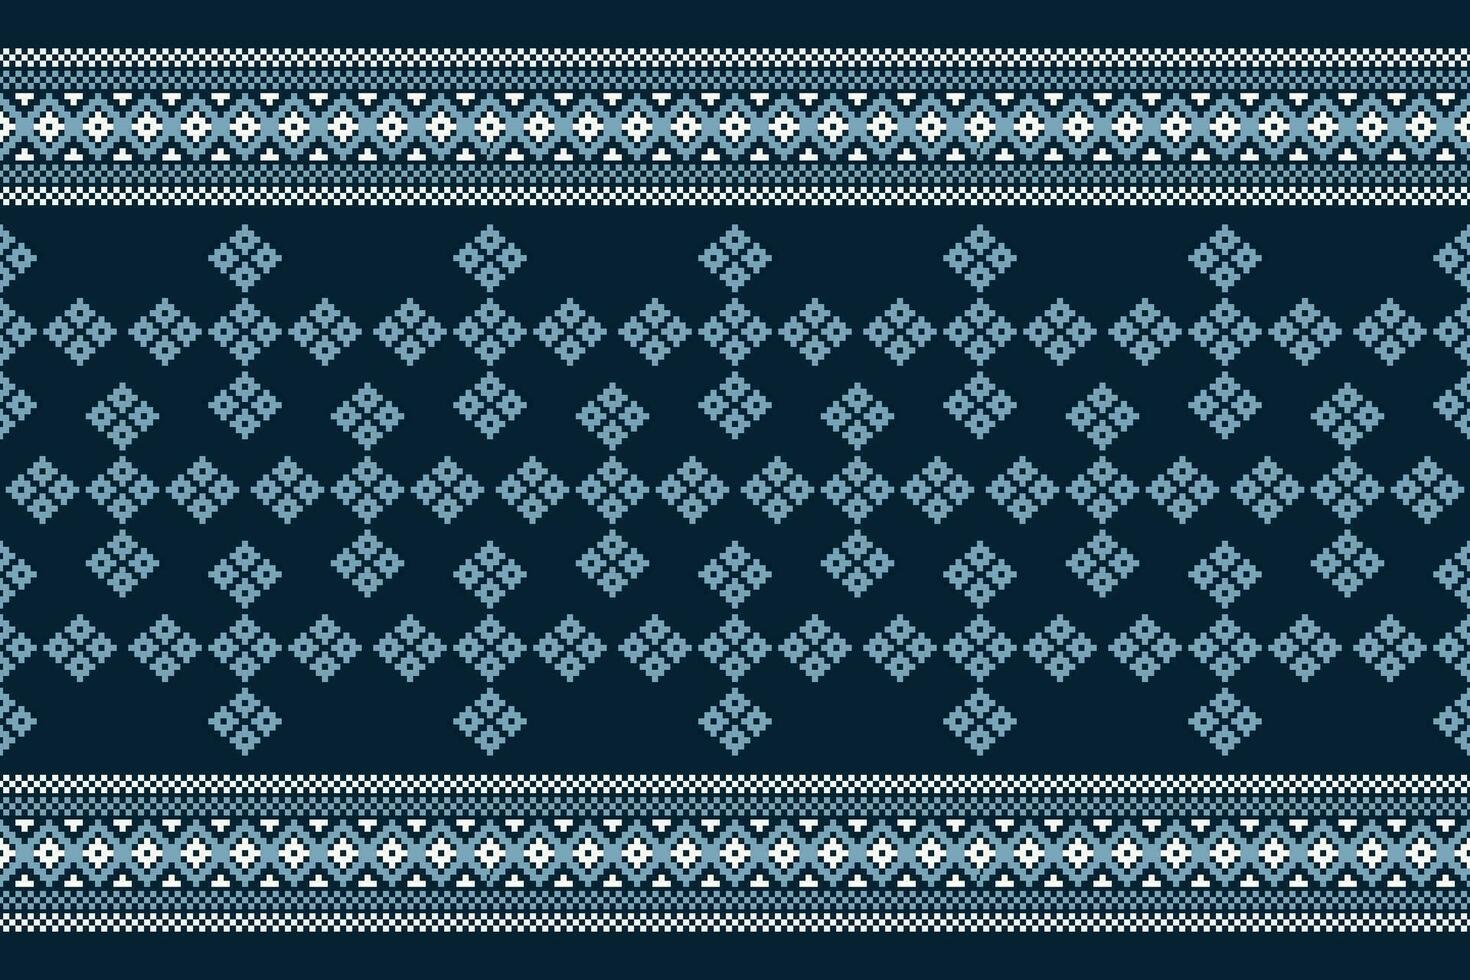 Ethnic geometric fabric pattern Cross Stitch.Ikat embroidery Ethnic oriental Pixel pattern navy blue background. Abstract,vector,illustration. Texture,clothing,scarf,decoration,motifs,silk wallpaper. vector